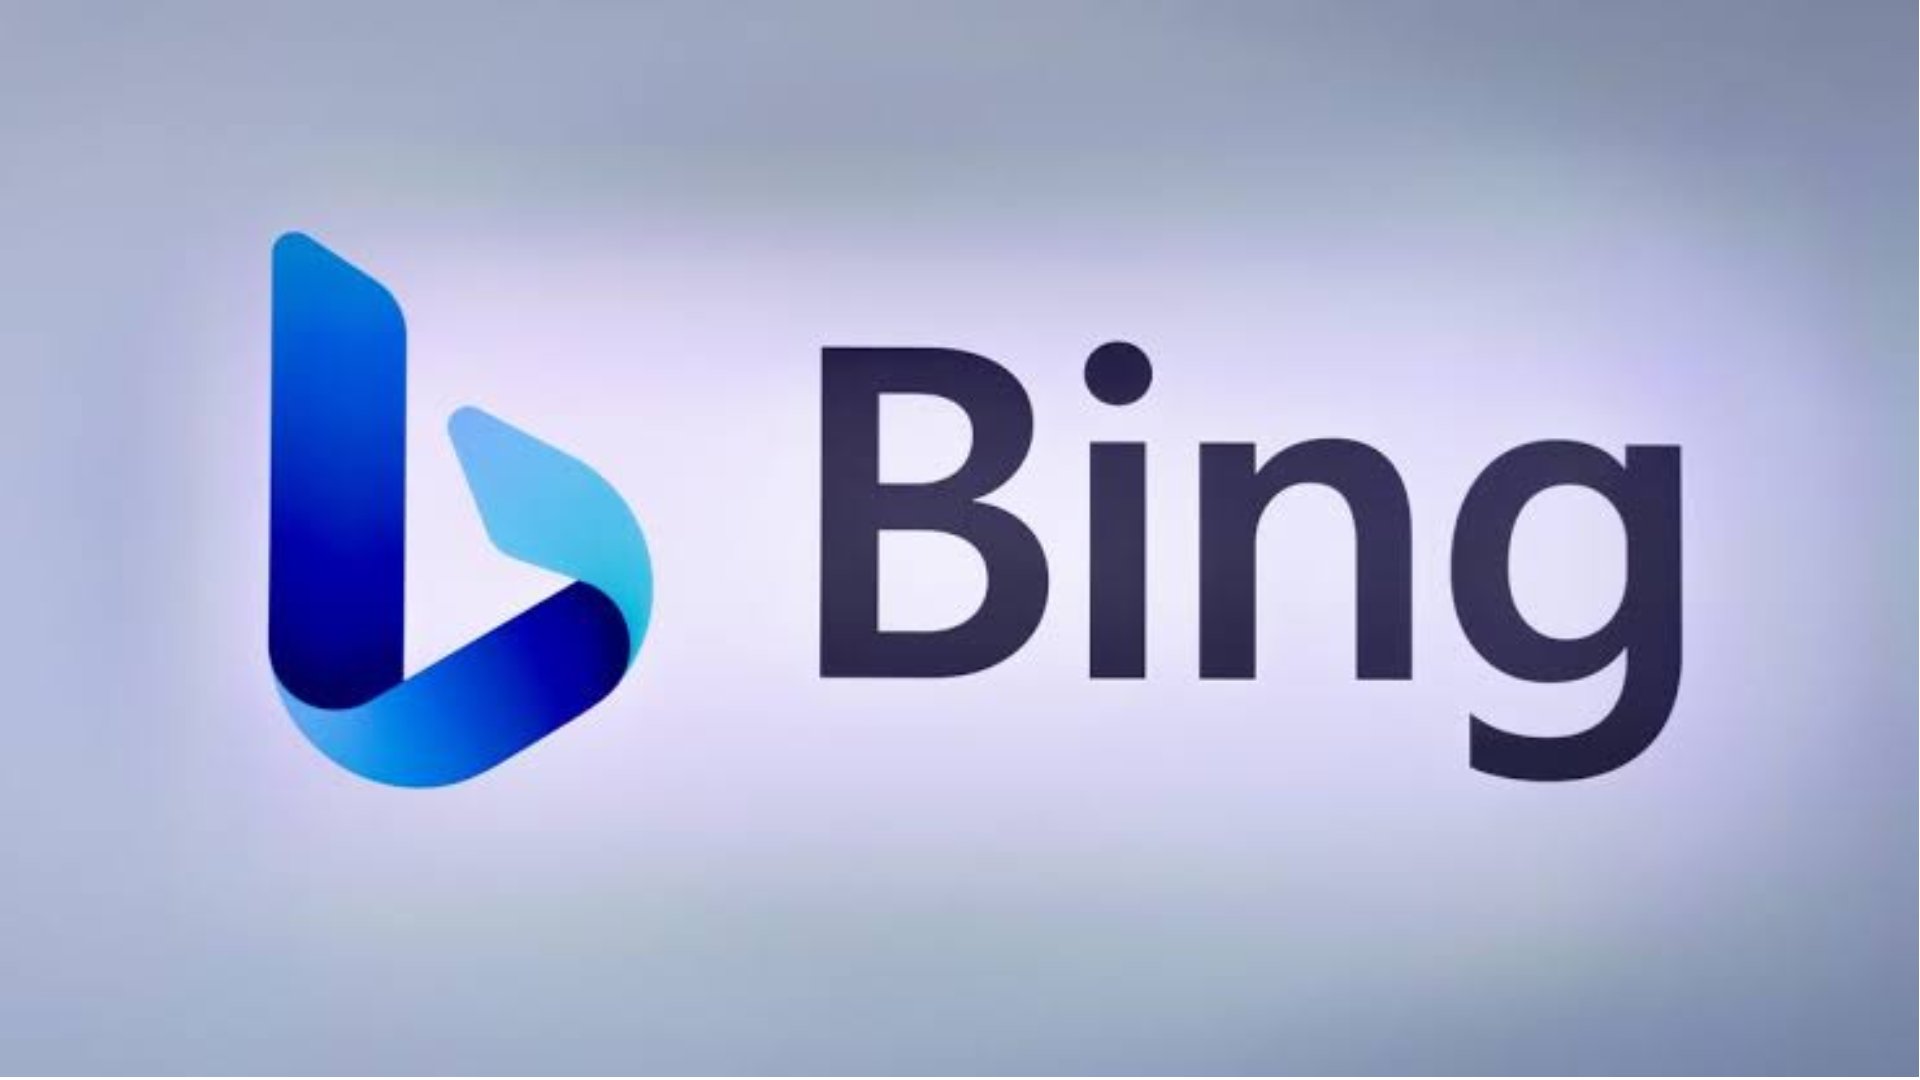 Microsoft: Bing Chat To Show Referrer Analytics Data In Coming Weeks